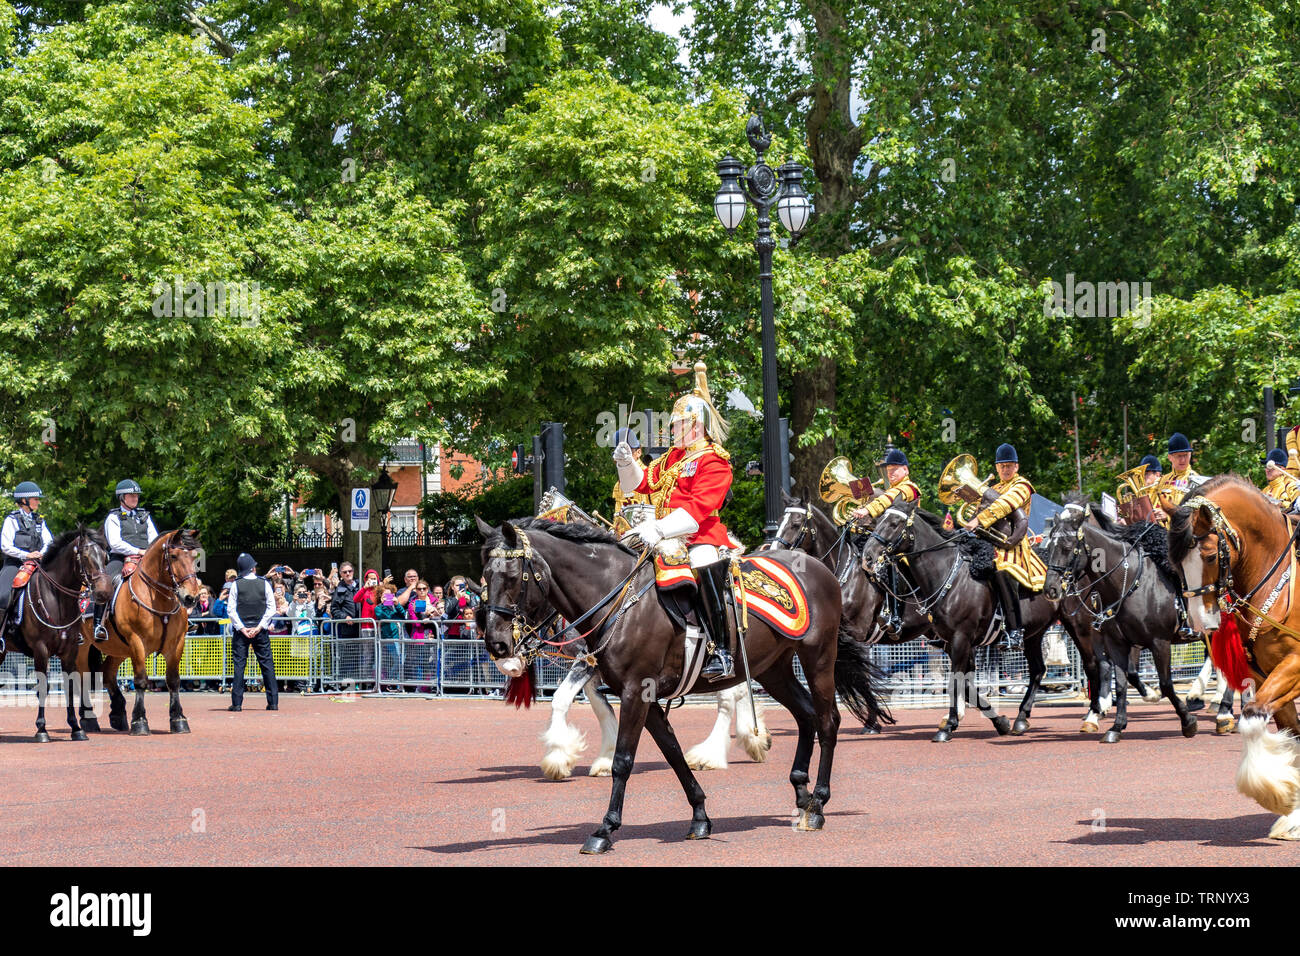 The Mounted Band of The Household Cavalry led by the Musical director , on The Mall at The Trooping The Colour Ceremony ,London, UK, 2019 Stock Photo